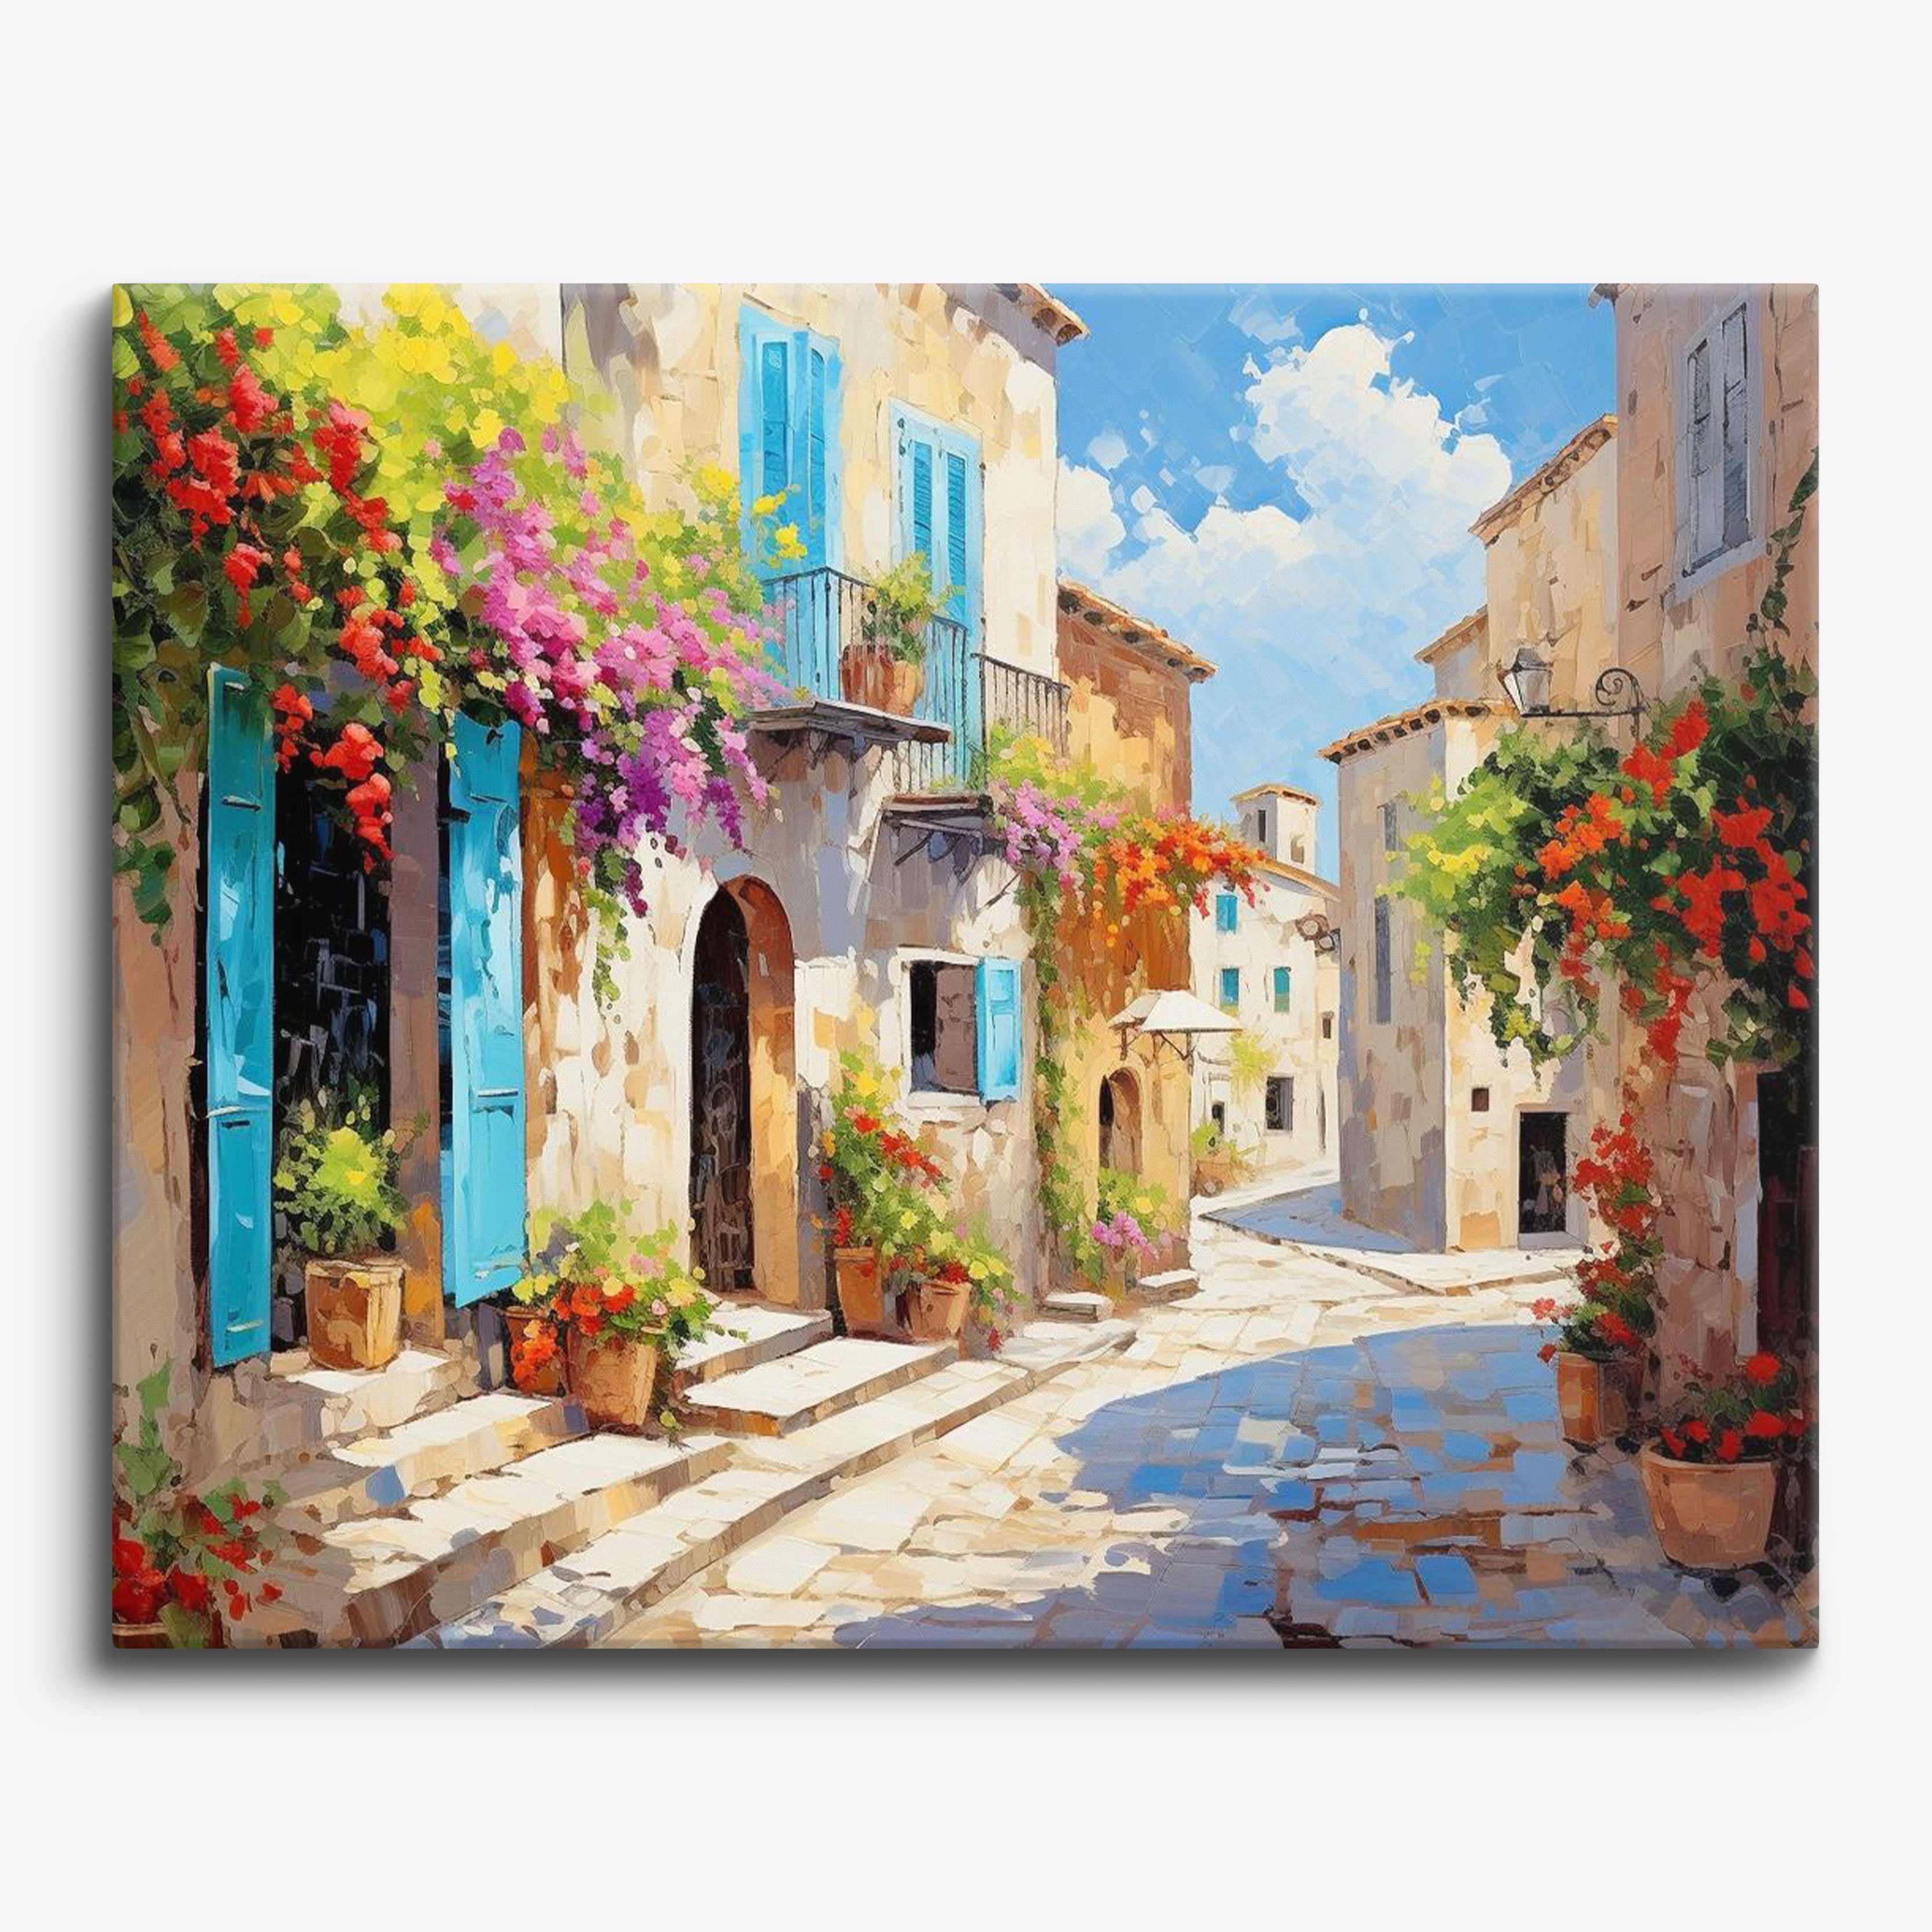  Ciieeo 1 Set Coloring Landscape Oil Painting whelping kit Kids  Decor Home Decor Home Accents Decor Painting Canvas for Adults Decor for  Home kit Picture Child Household Pigment : Arts